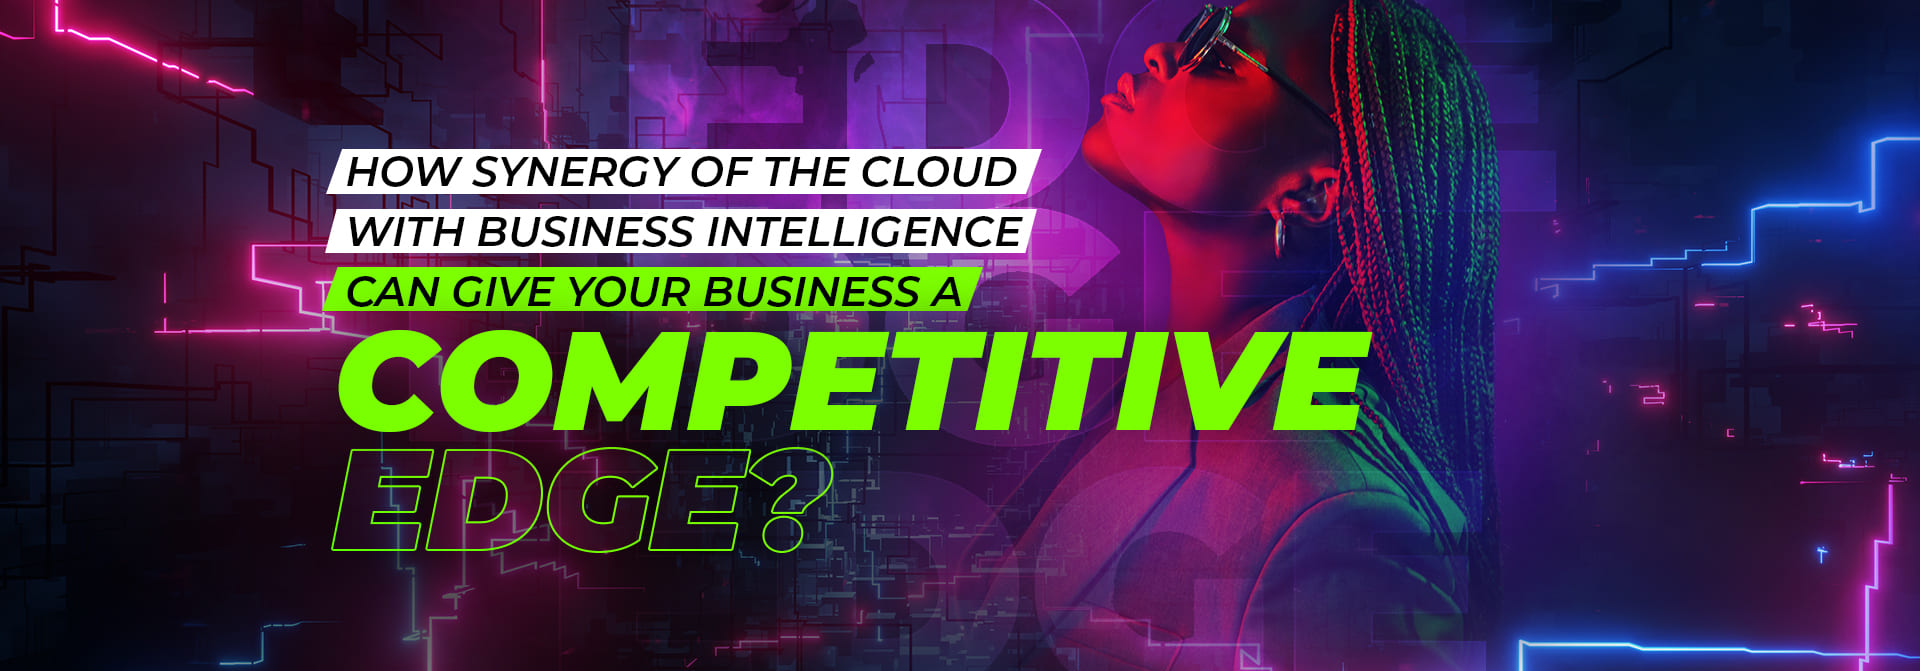 How Synergy of the Cloud with BI can give business a competitive edge?